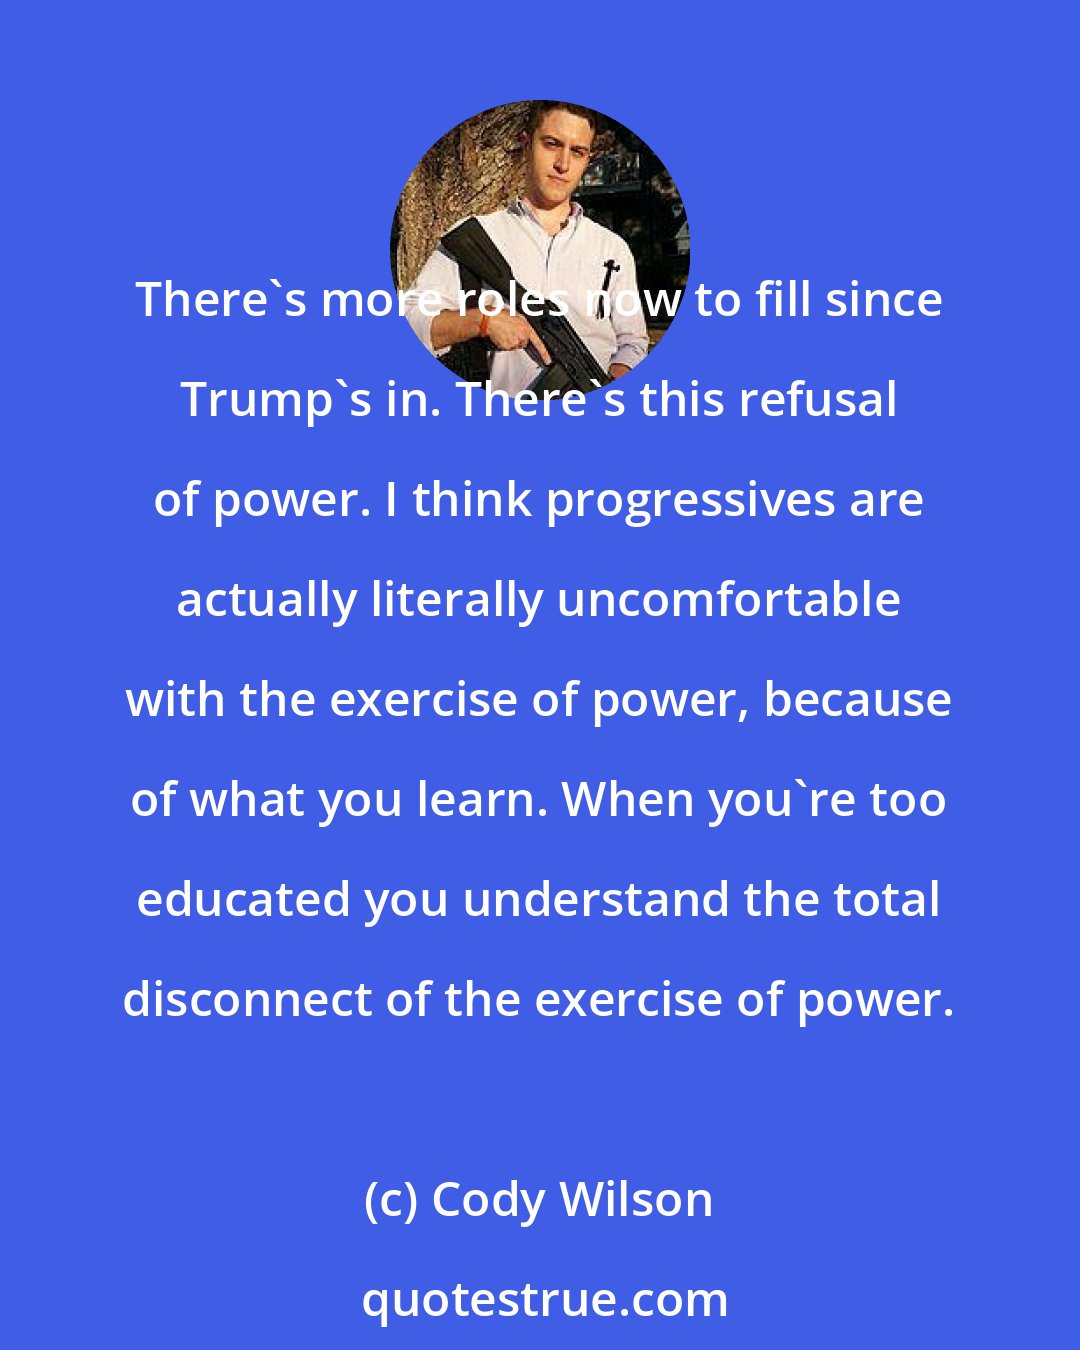 Cody Wilson: There's more roles now to fill since Trump's in. There's this refusal of power. I think progressives are actually literally uncomfortable with the exercise of power, because of what you learn. When you're too educated you understand the total disconnect of the exercise of power.